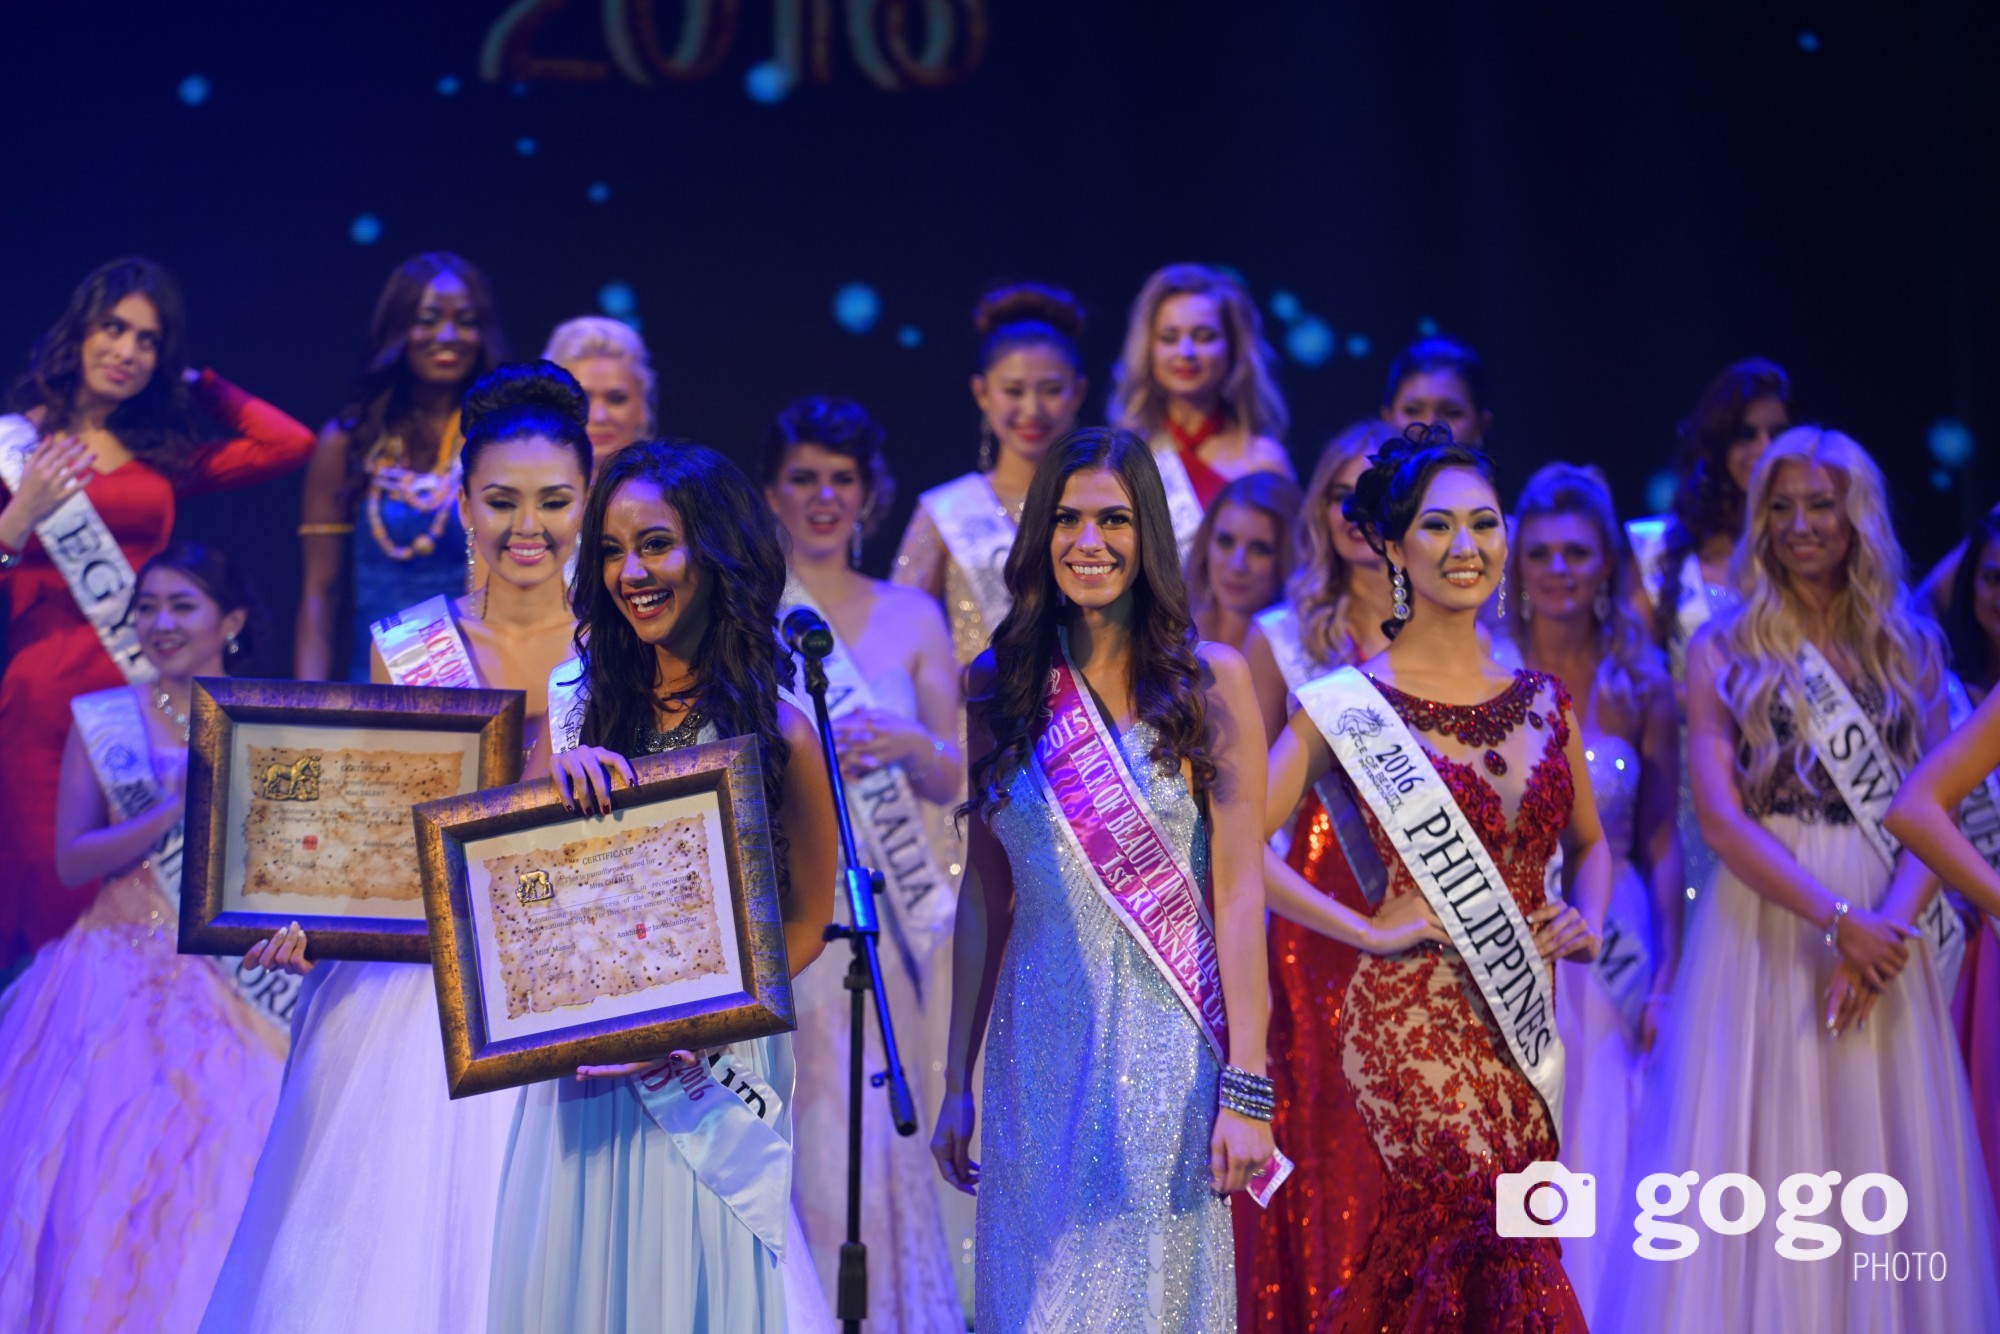 Miss Charity awards goes to Miss Switzerland 